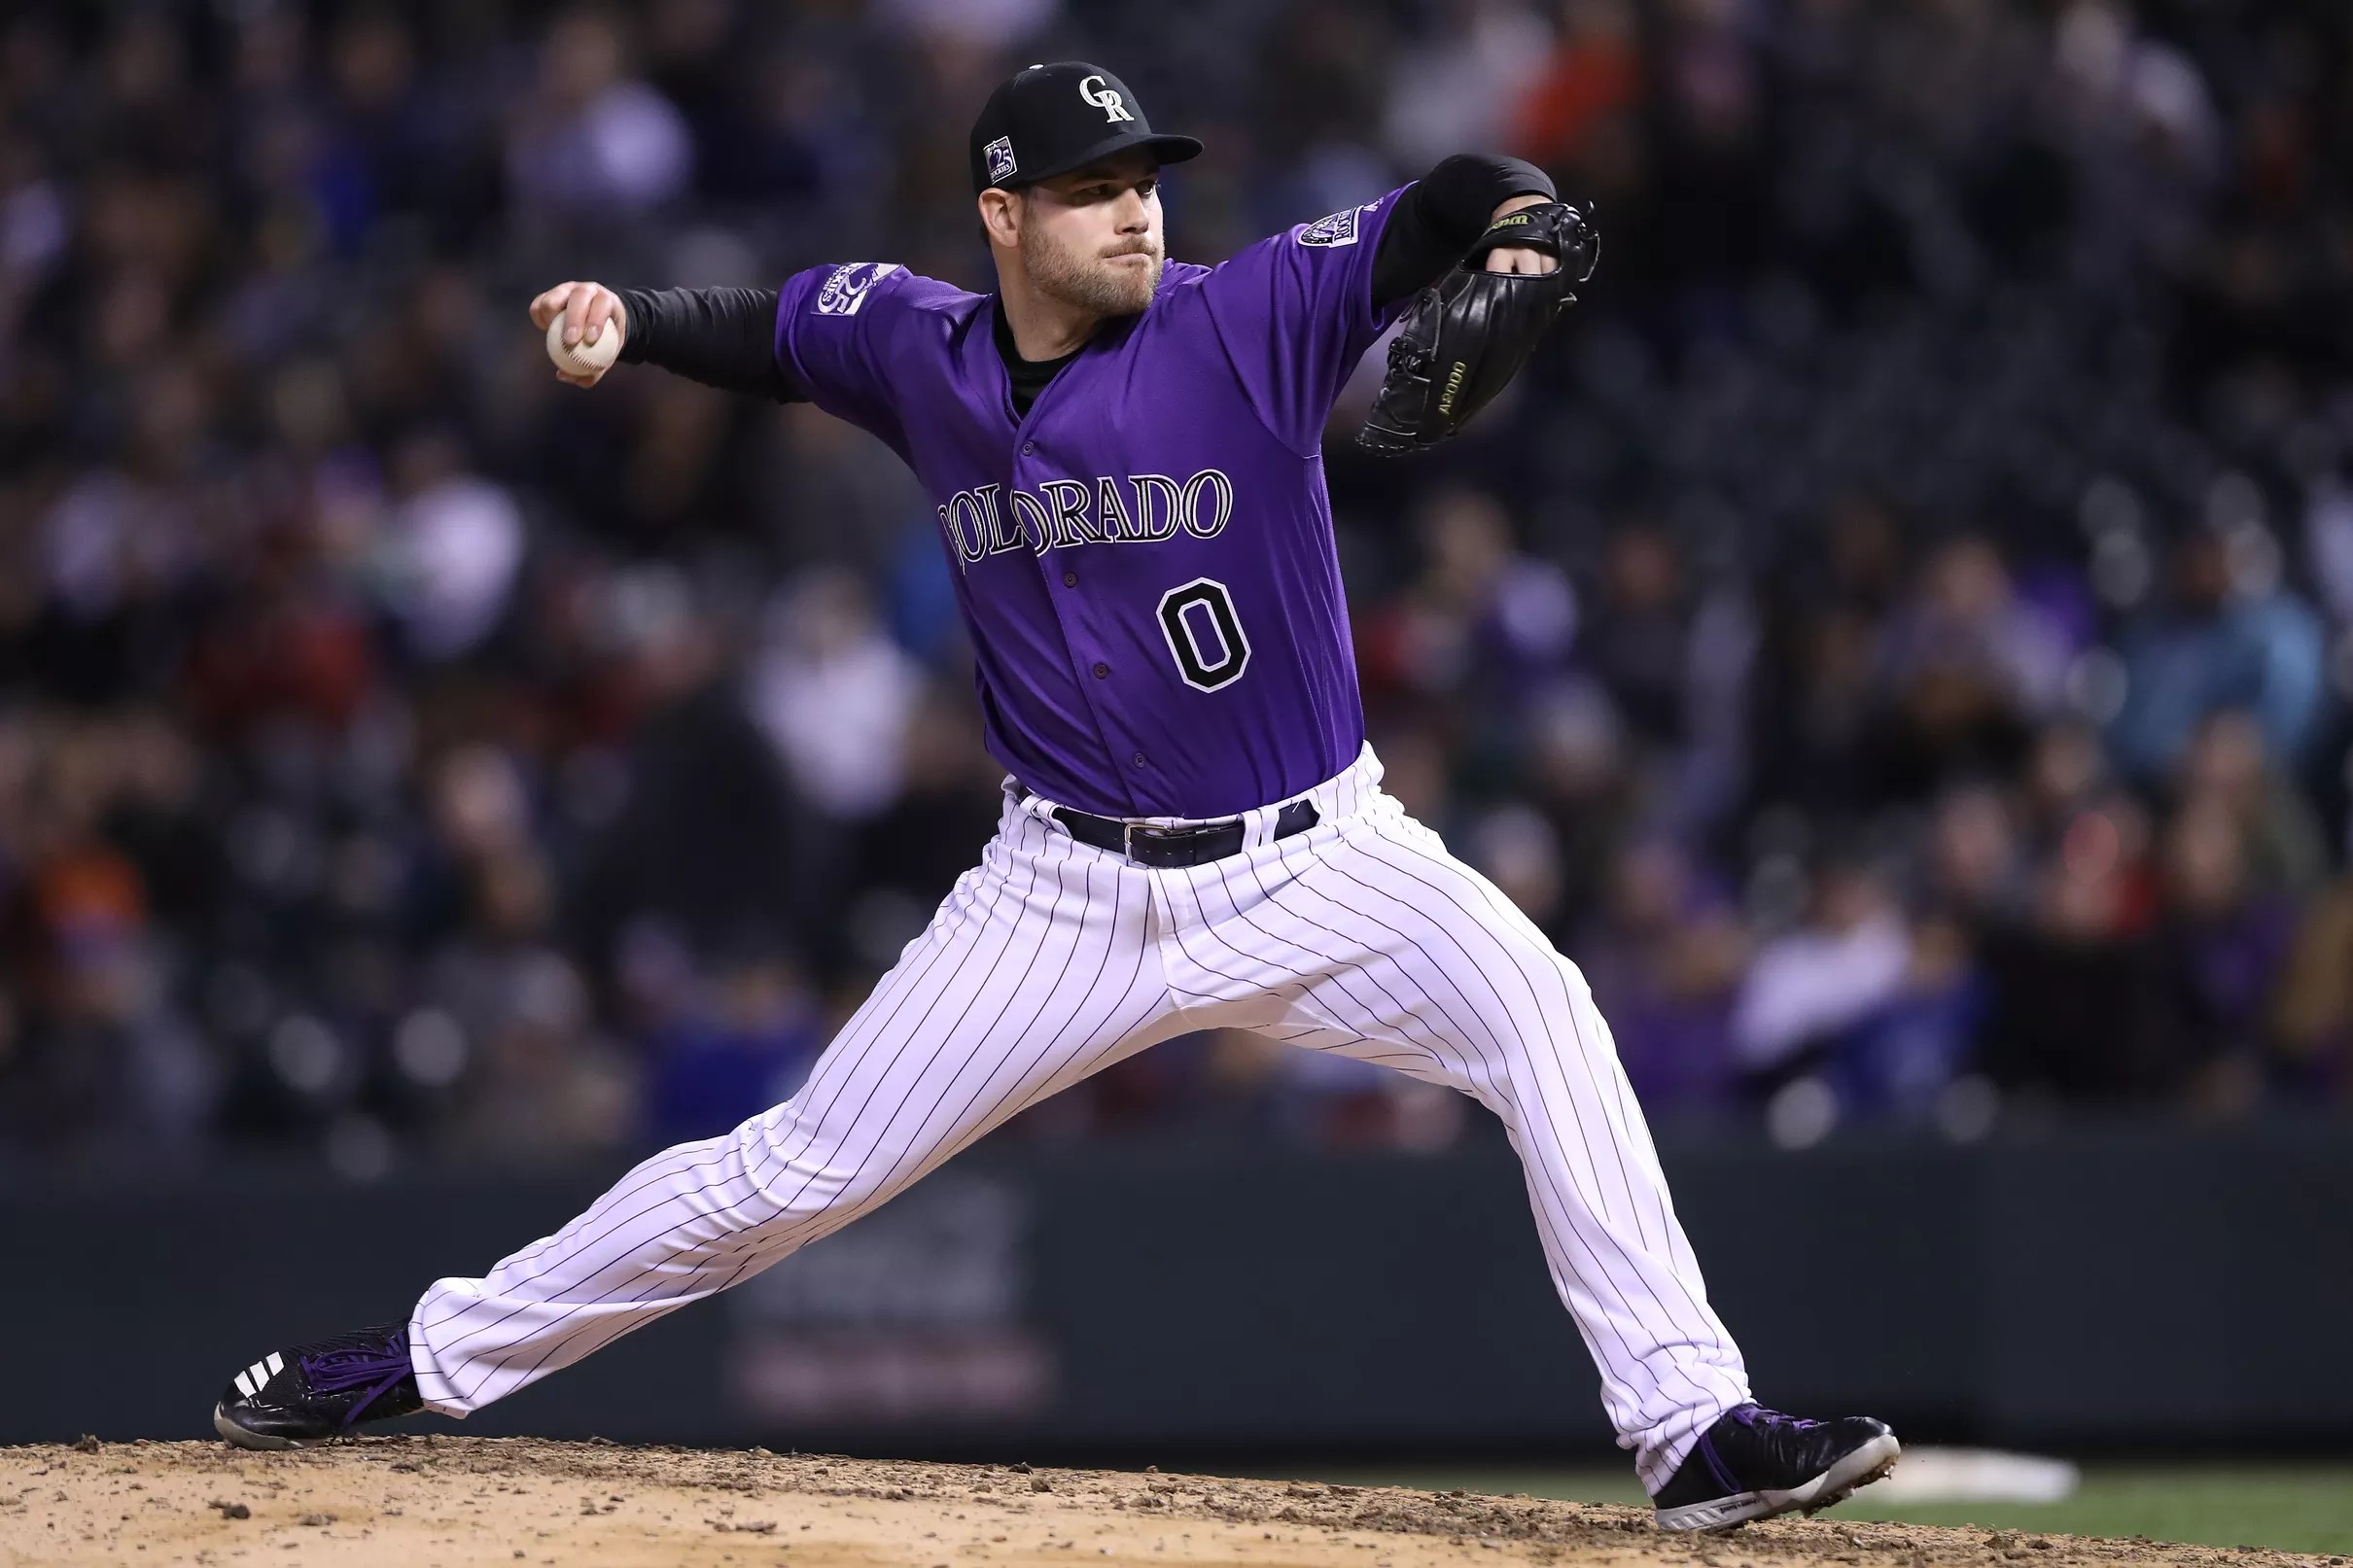 Adam Ottavino gives the Yankees another strikeout artist